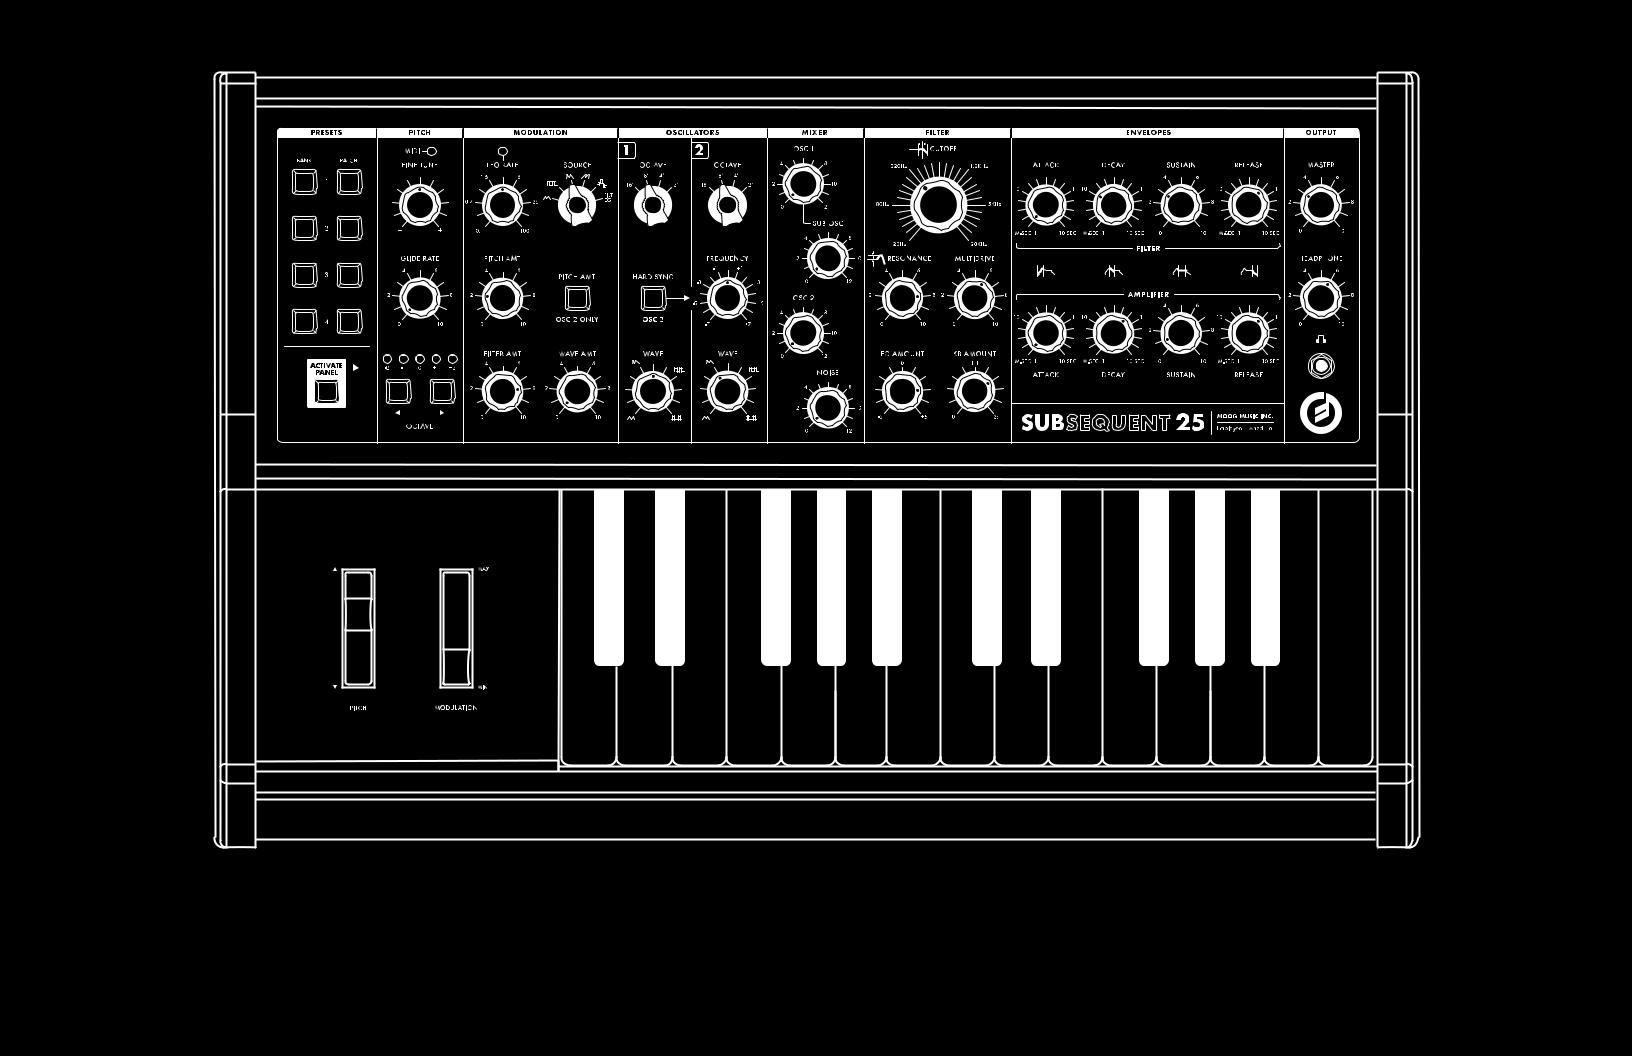 Moog Music Subsequent 25 User Manual